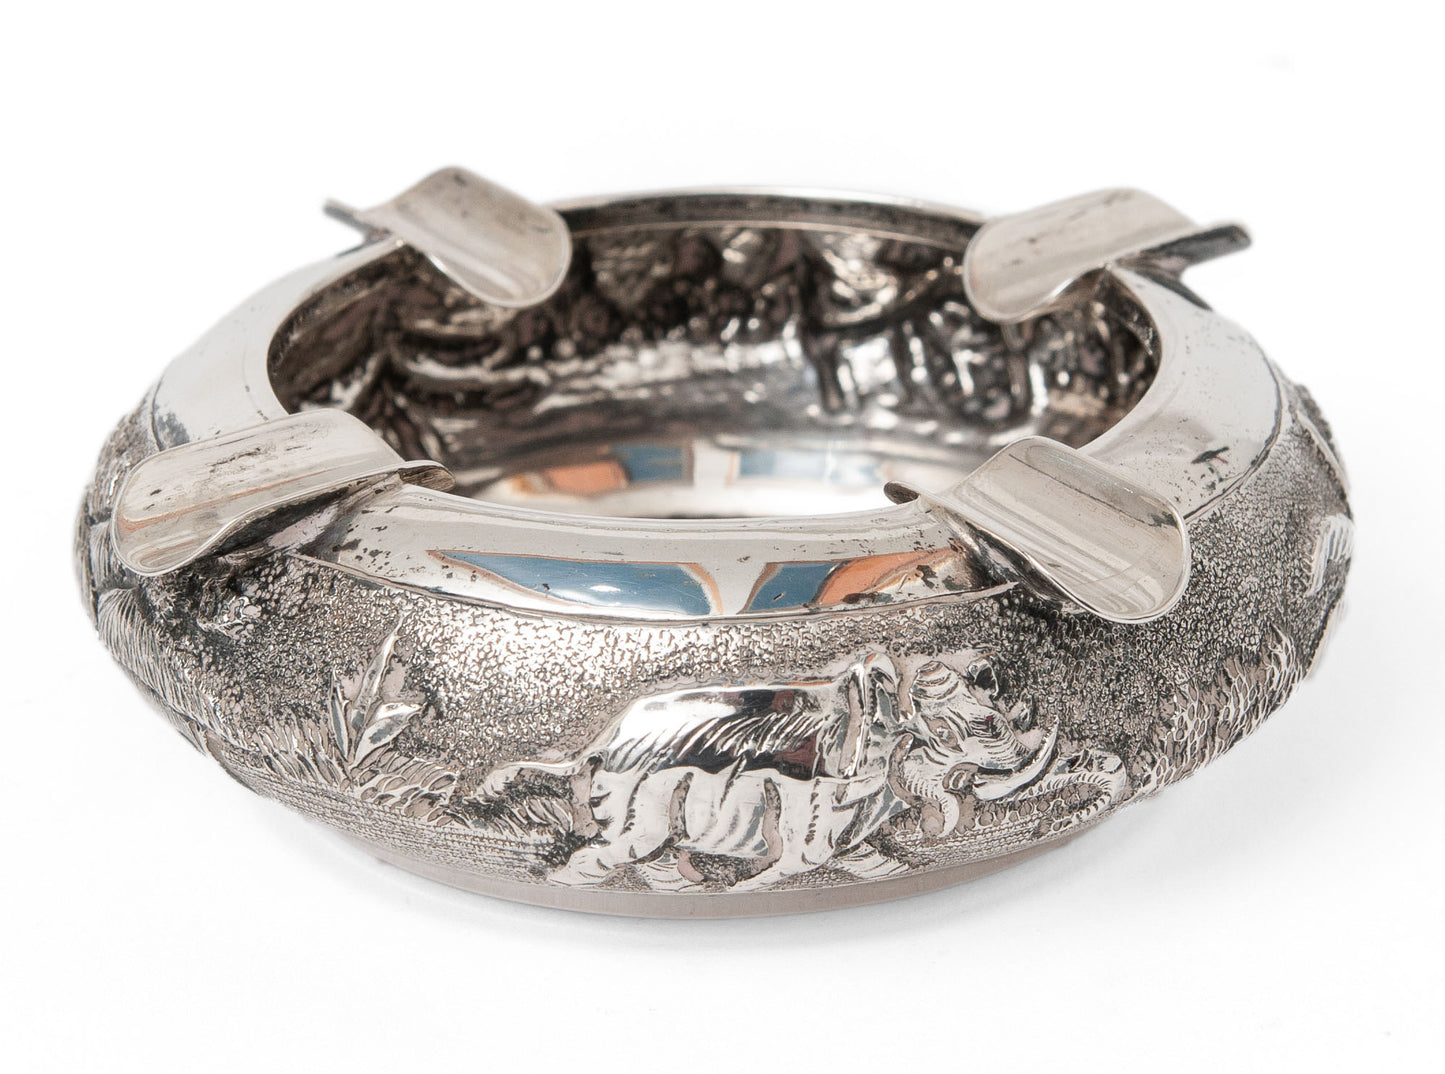 Vintage Burmese/Thai Sterling Silver Repousse Ashtray with Tropical Elephant (Code 1384)